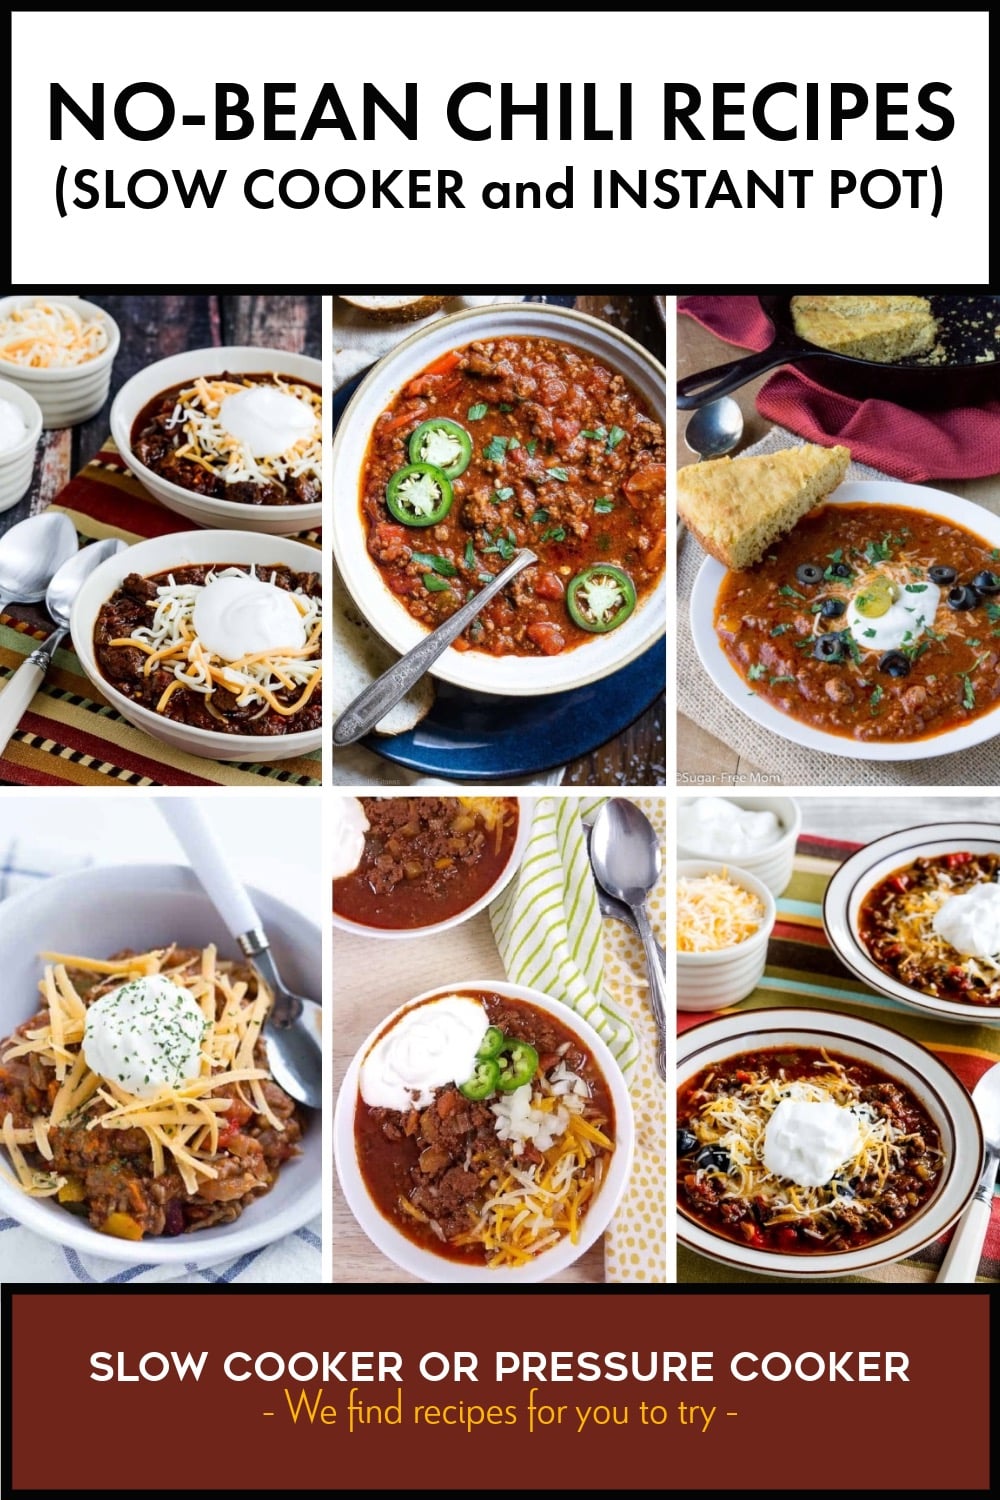 Pinterest image of No-Bean Chili Recipes (Slow Cooker and Instant Pot)